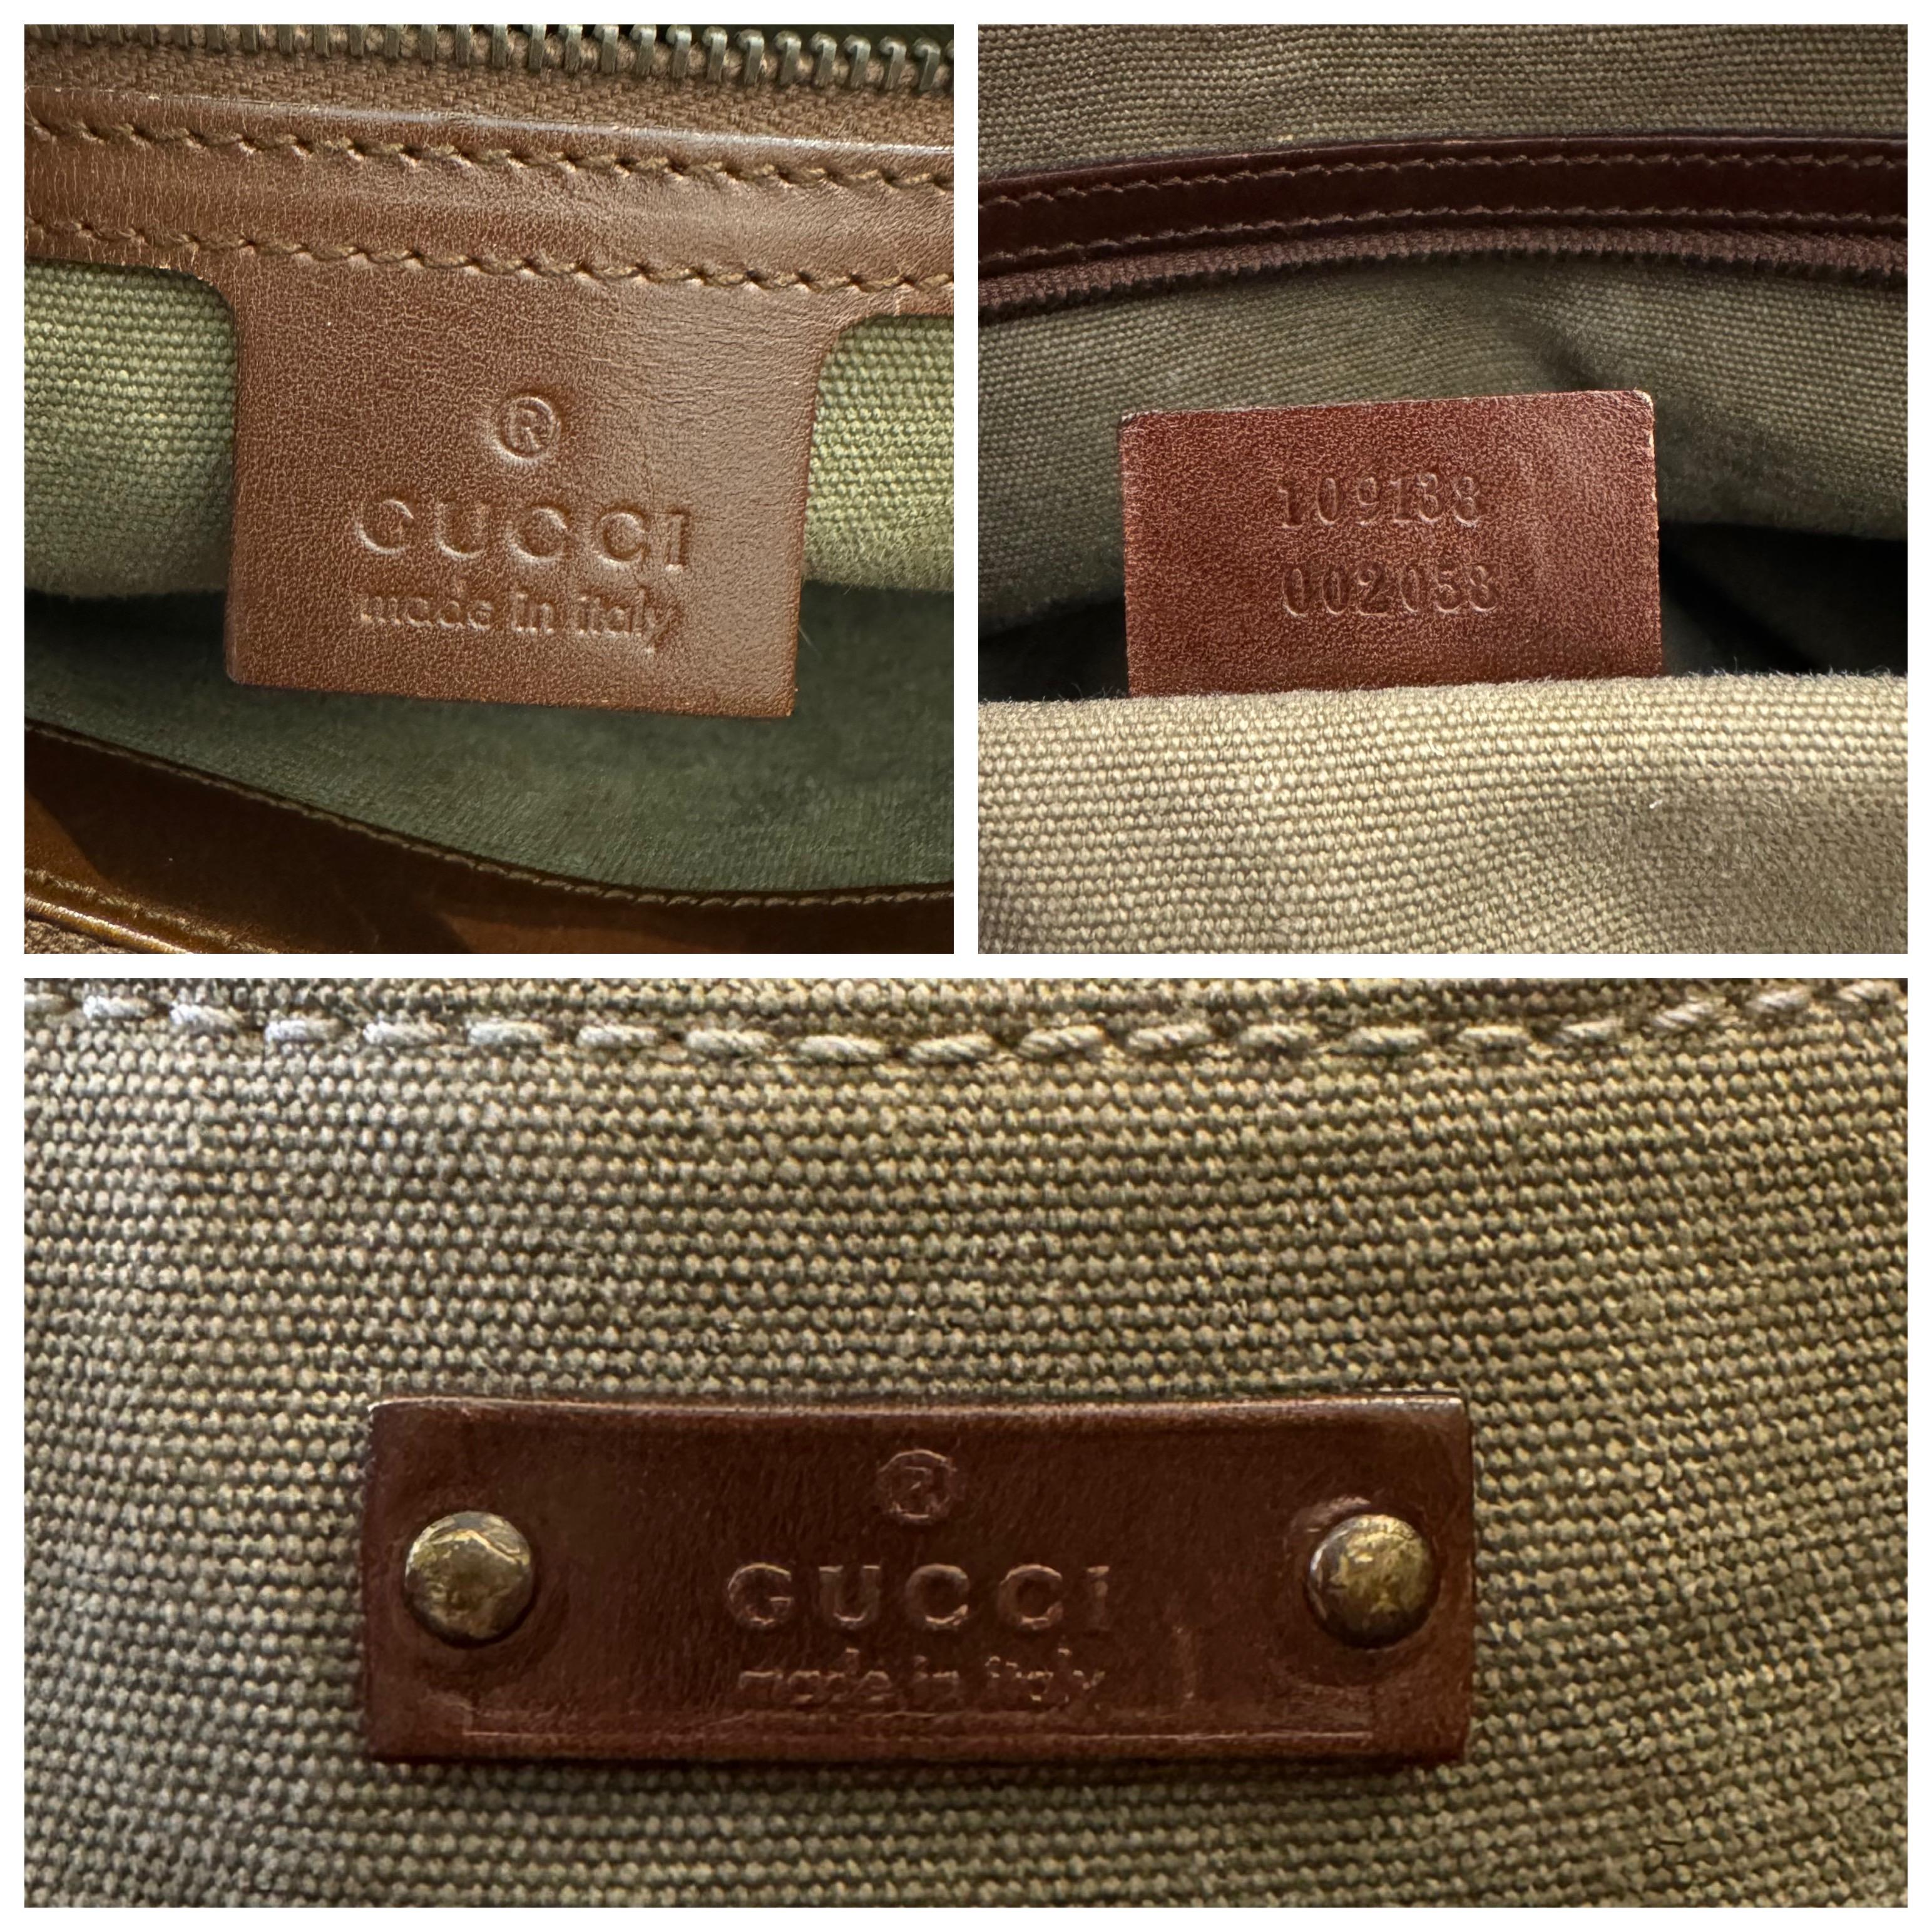 Vintage GUCCI Canvas Bamboo Tote Bag Khaki For Sale 2